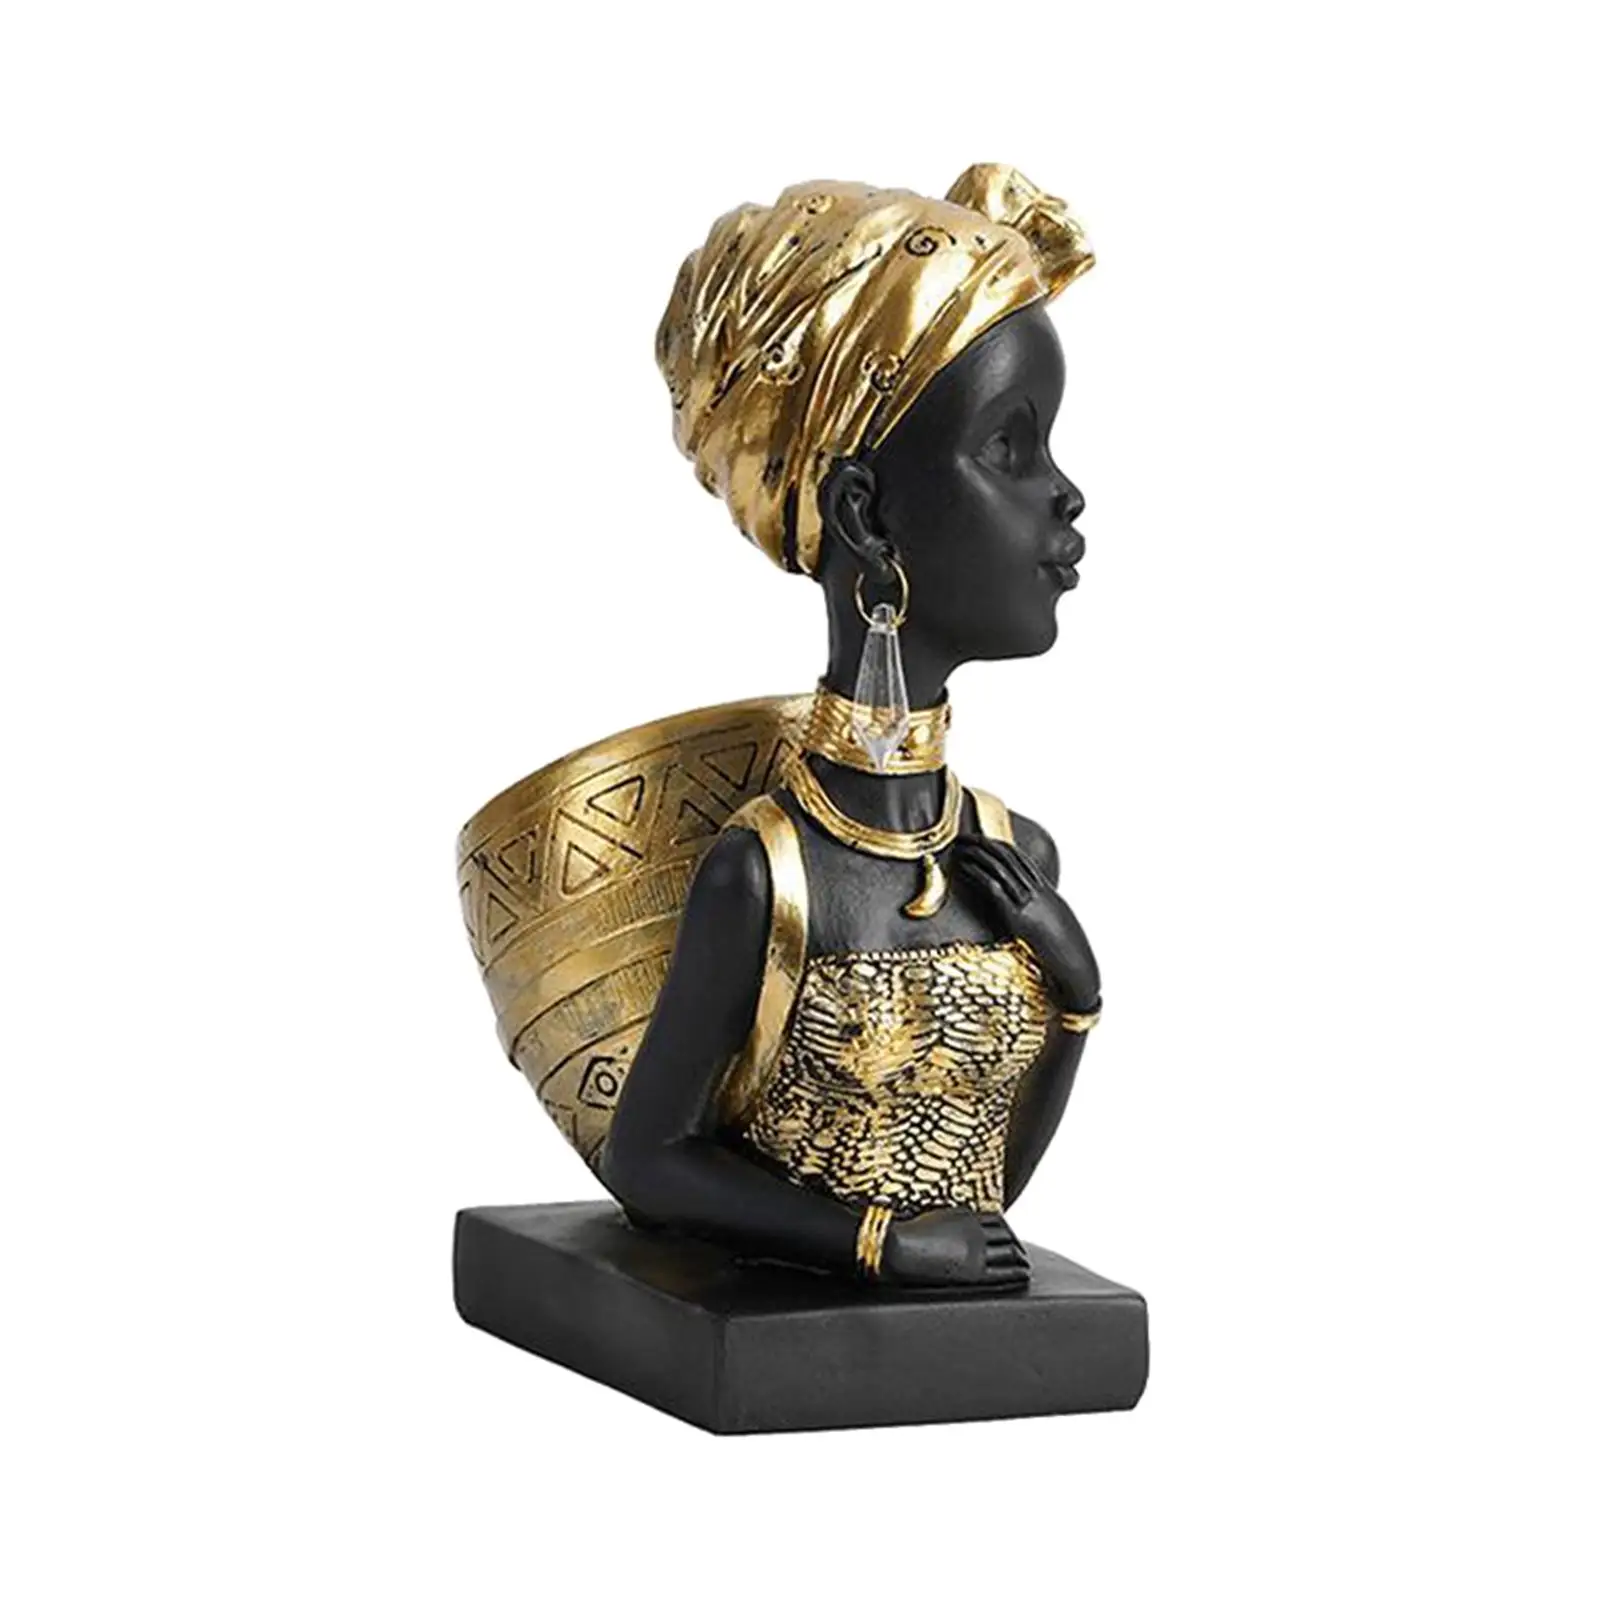 Vintage Style Lady Statue Sculpture African Figurines Human for Bookshelf Table Hotel